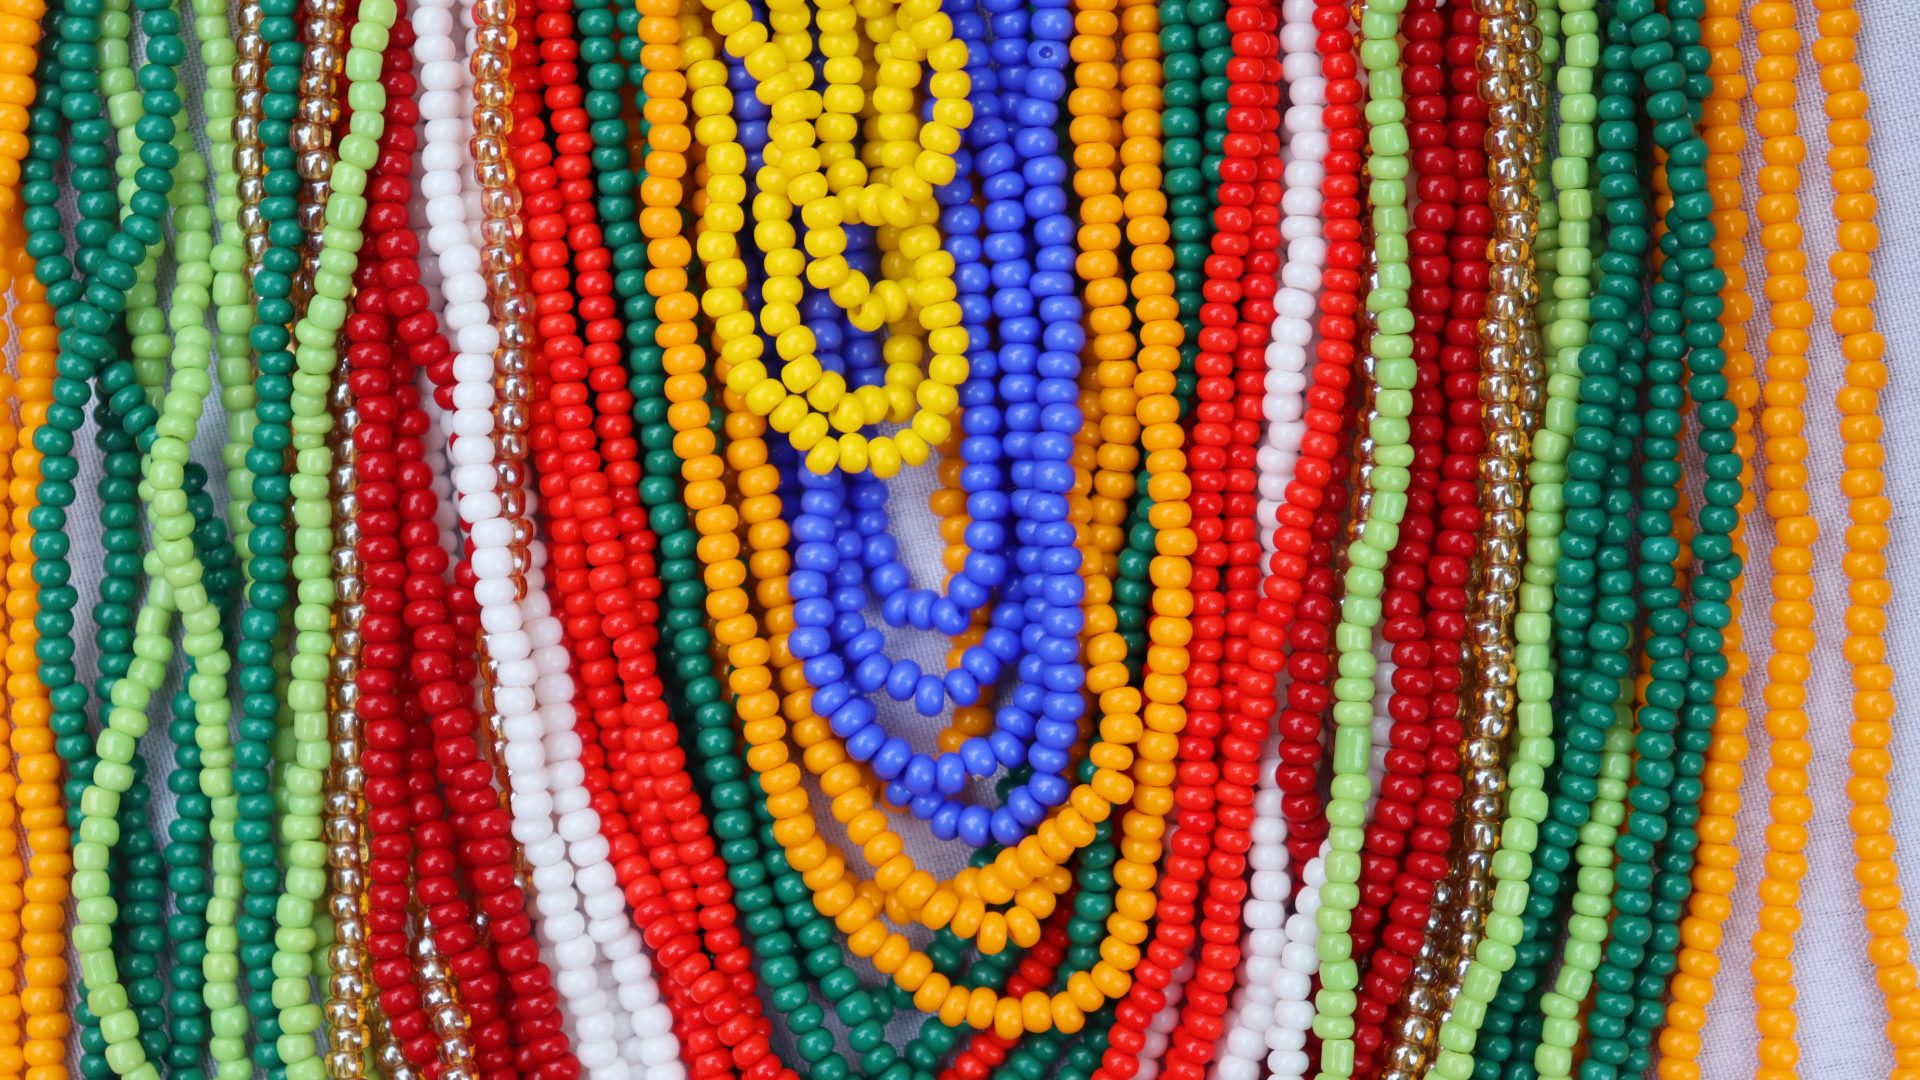 Bead necklace made by the artisans of the Awajún community of Amarno